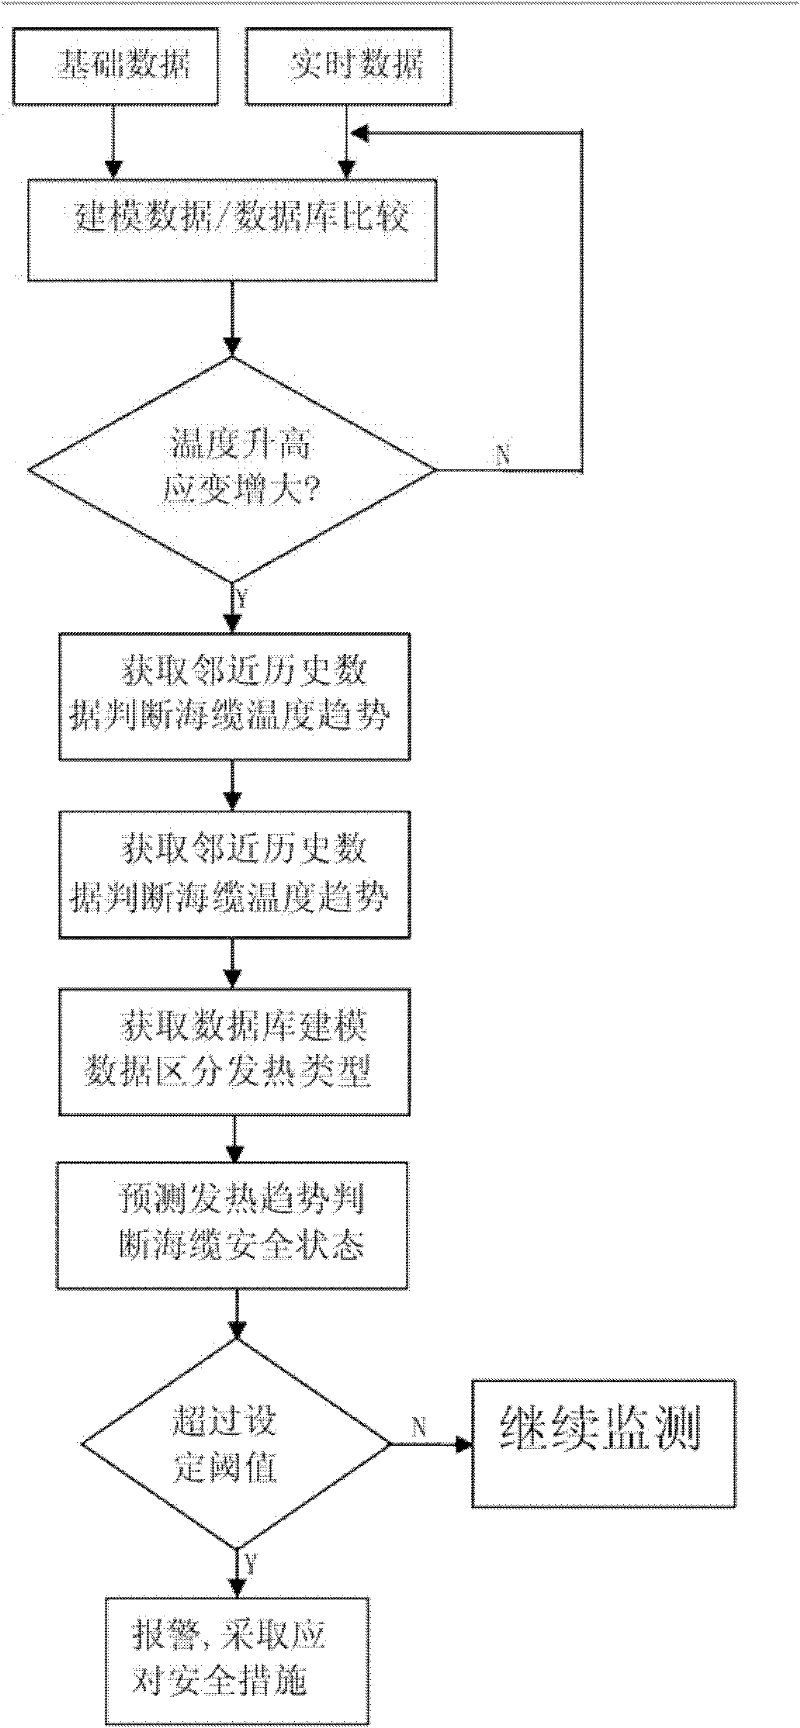 Temperature rise strain monitoring and alarming and fault analysis method for composite submarine cable